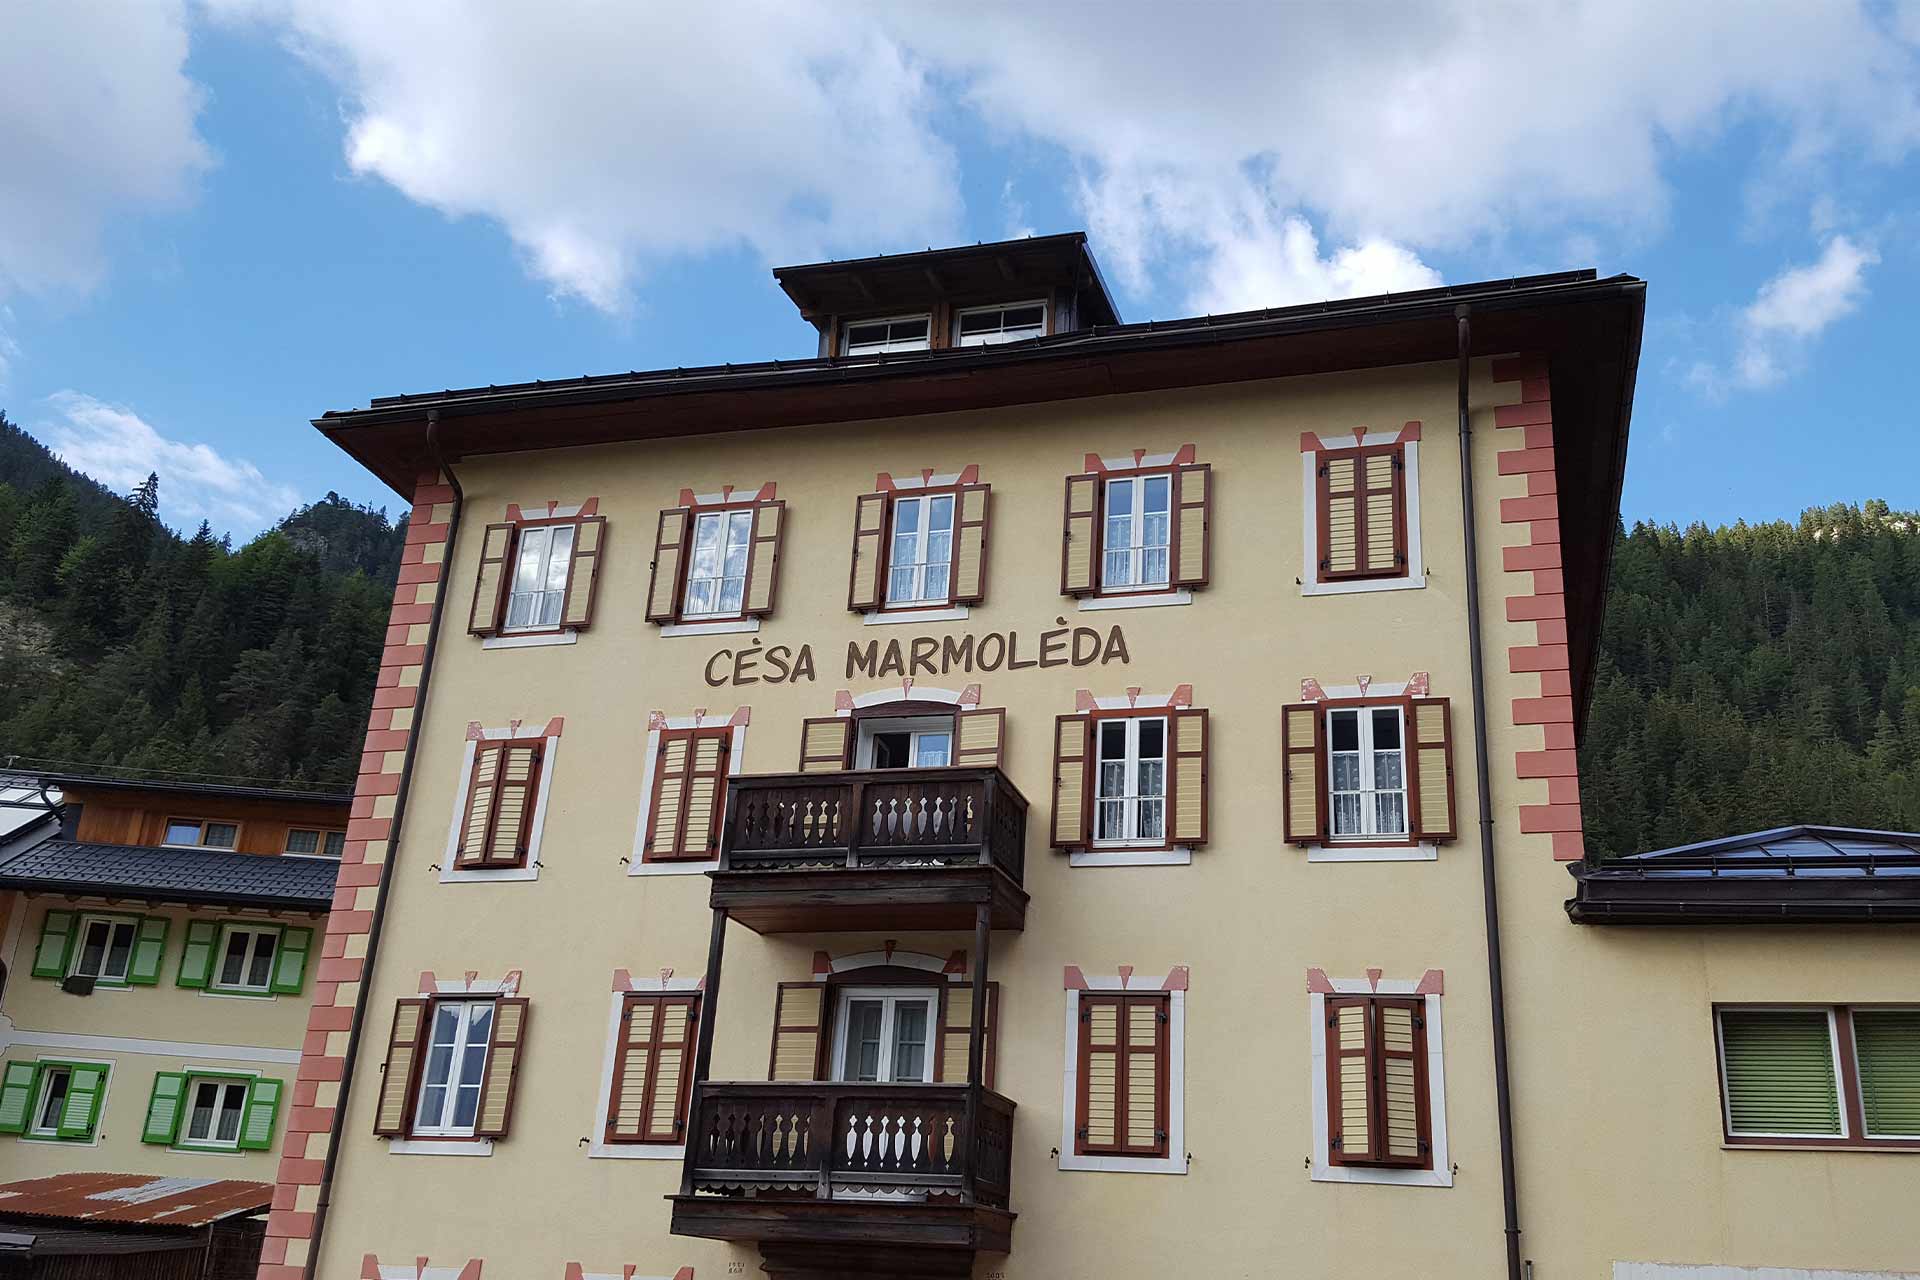 A building reading 'cesa marmoleda' on the front